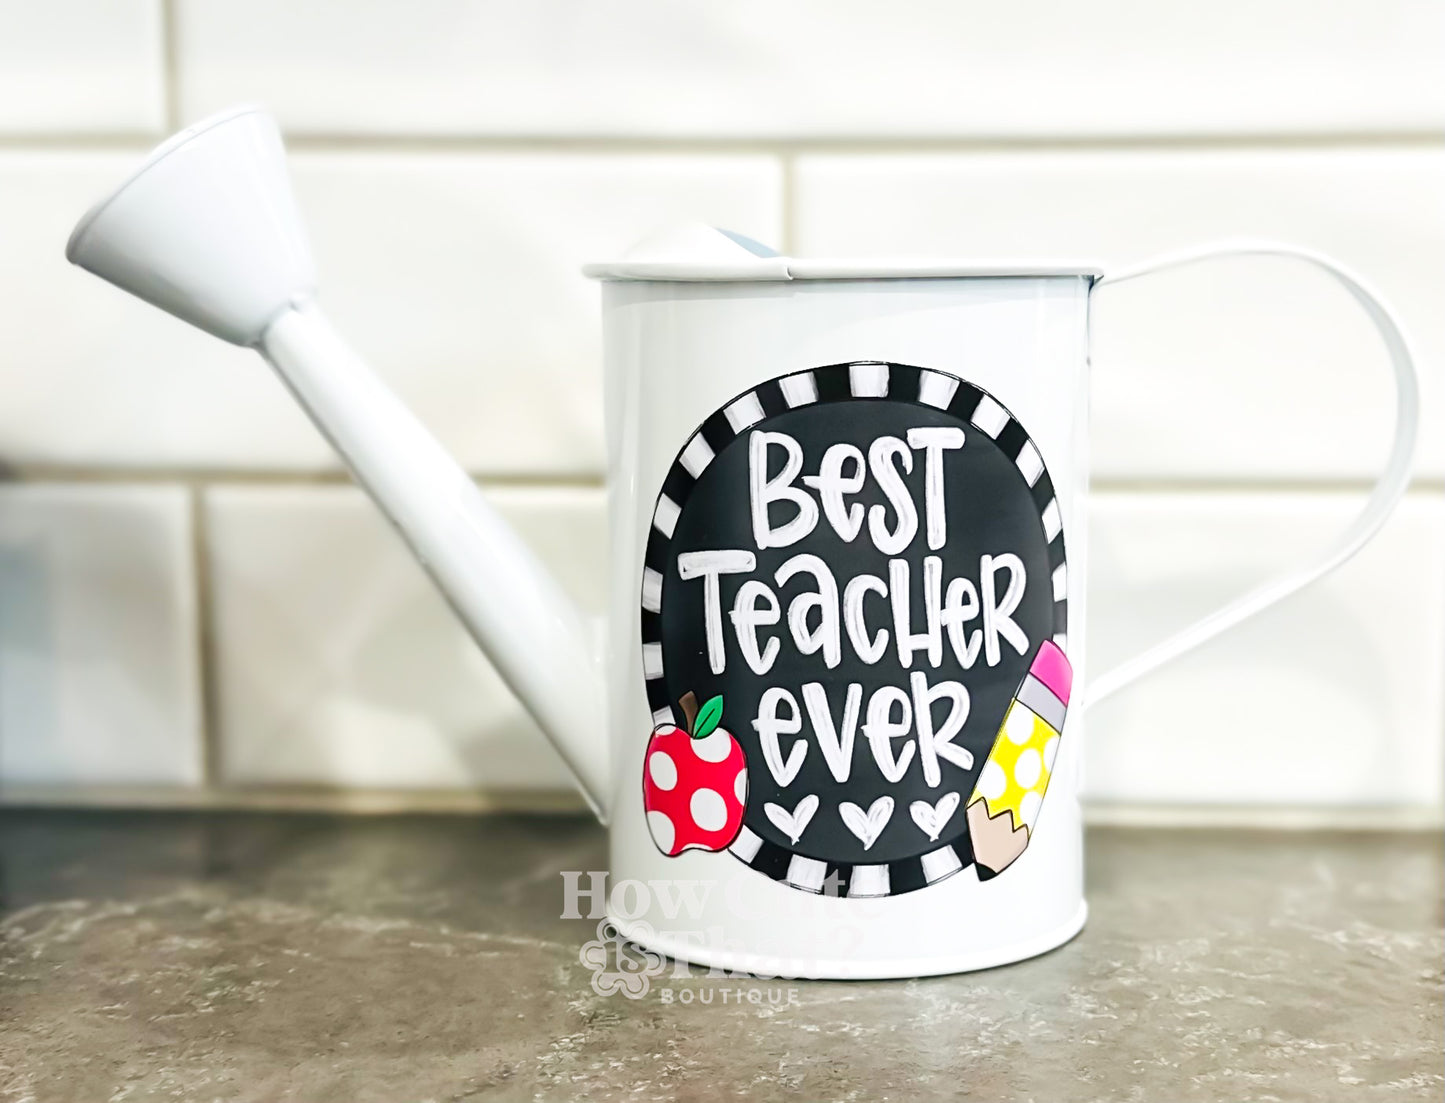 BEST TEACHER EVER WATERING CAN- SMALL